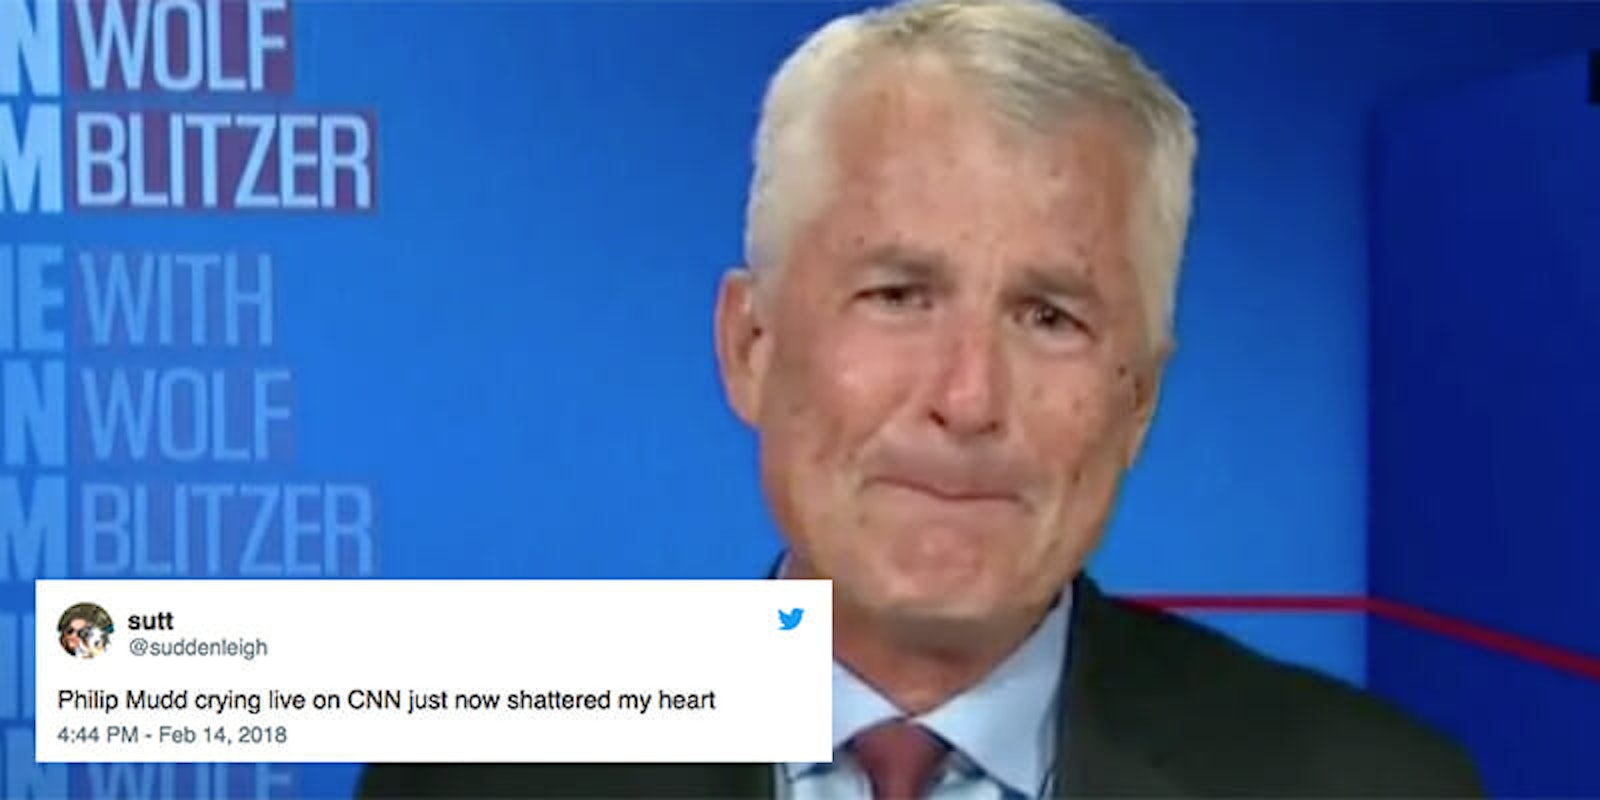 CNN analyst Philip Mudd broke down in tears during an interview about the school shooting in Parkland, Florida.